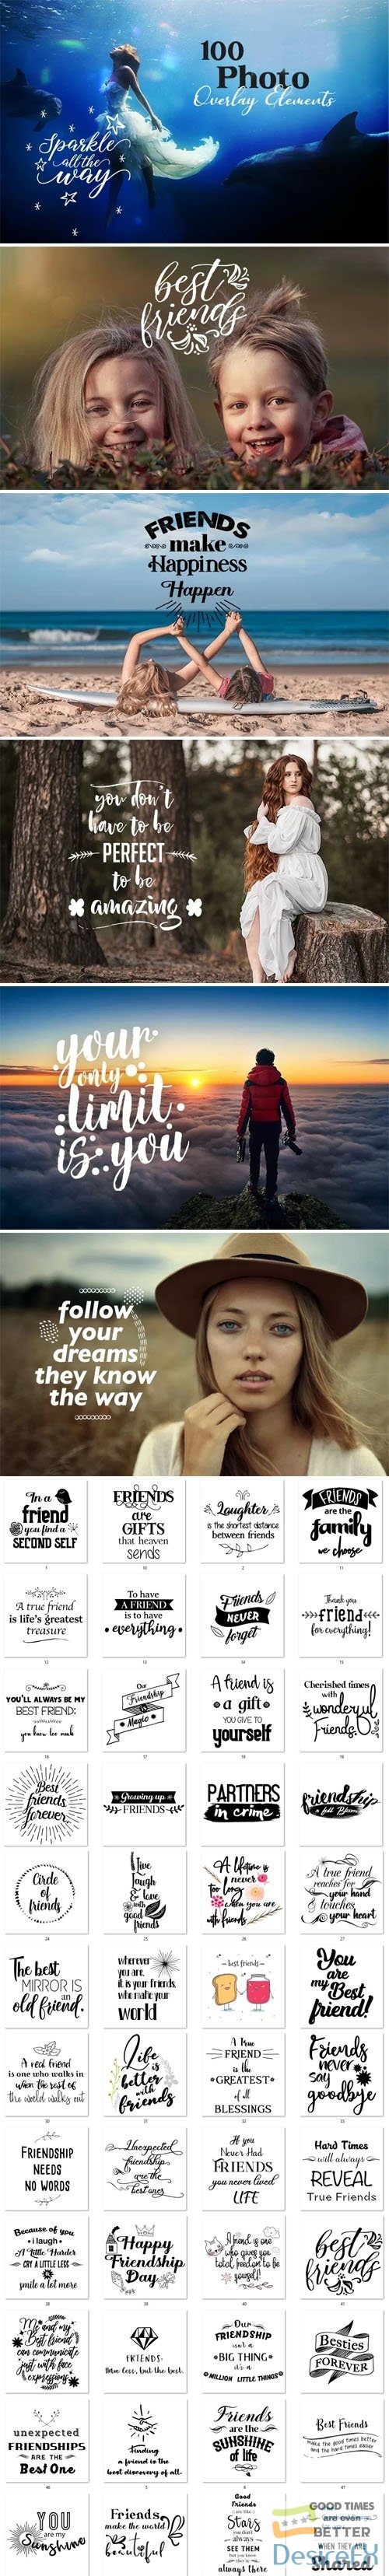 100 Inspirational Text Overlays for Photoshop